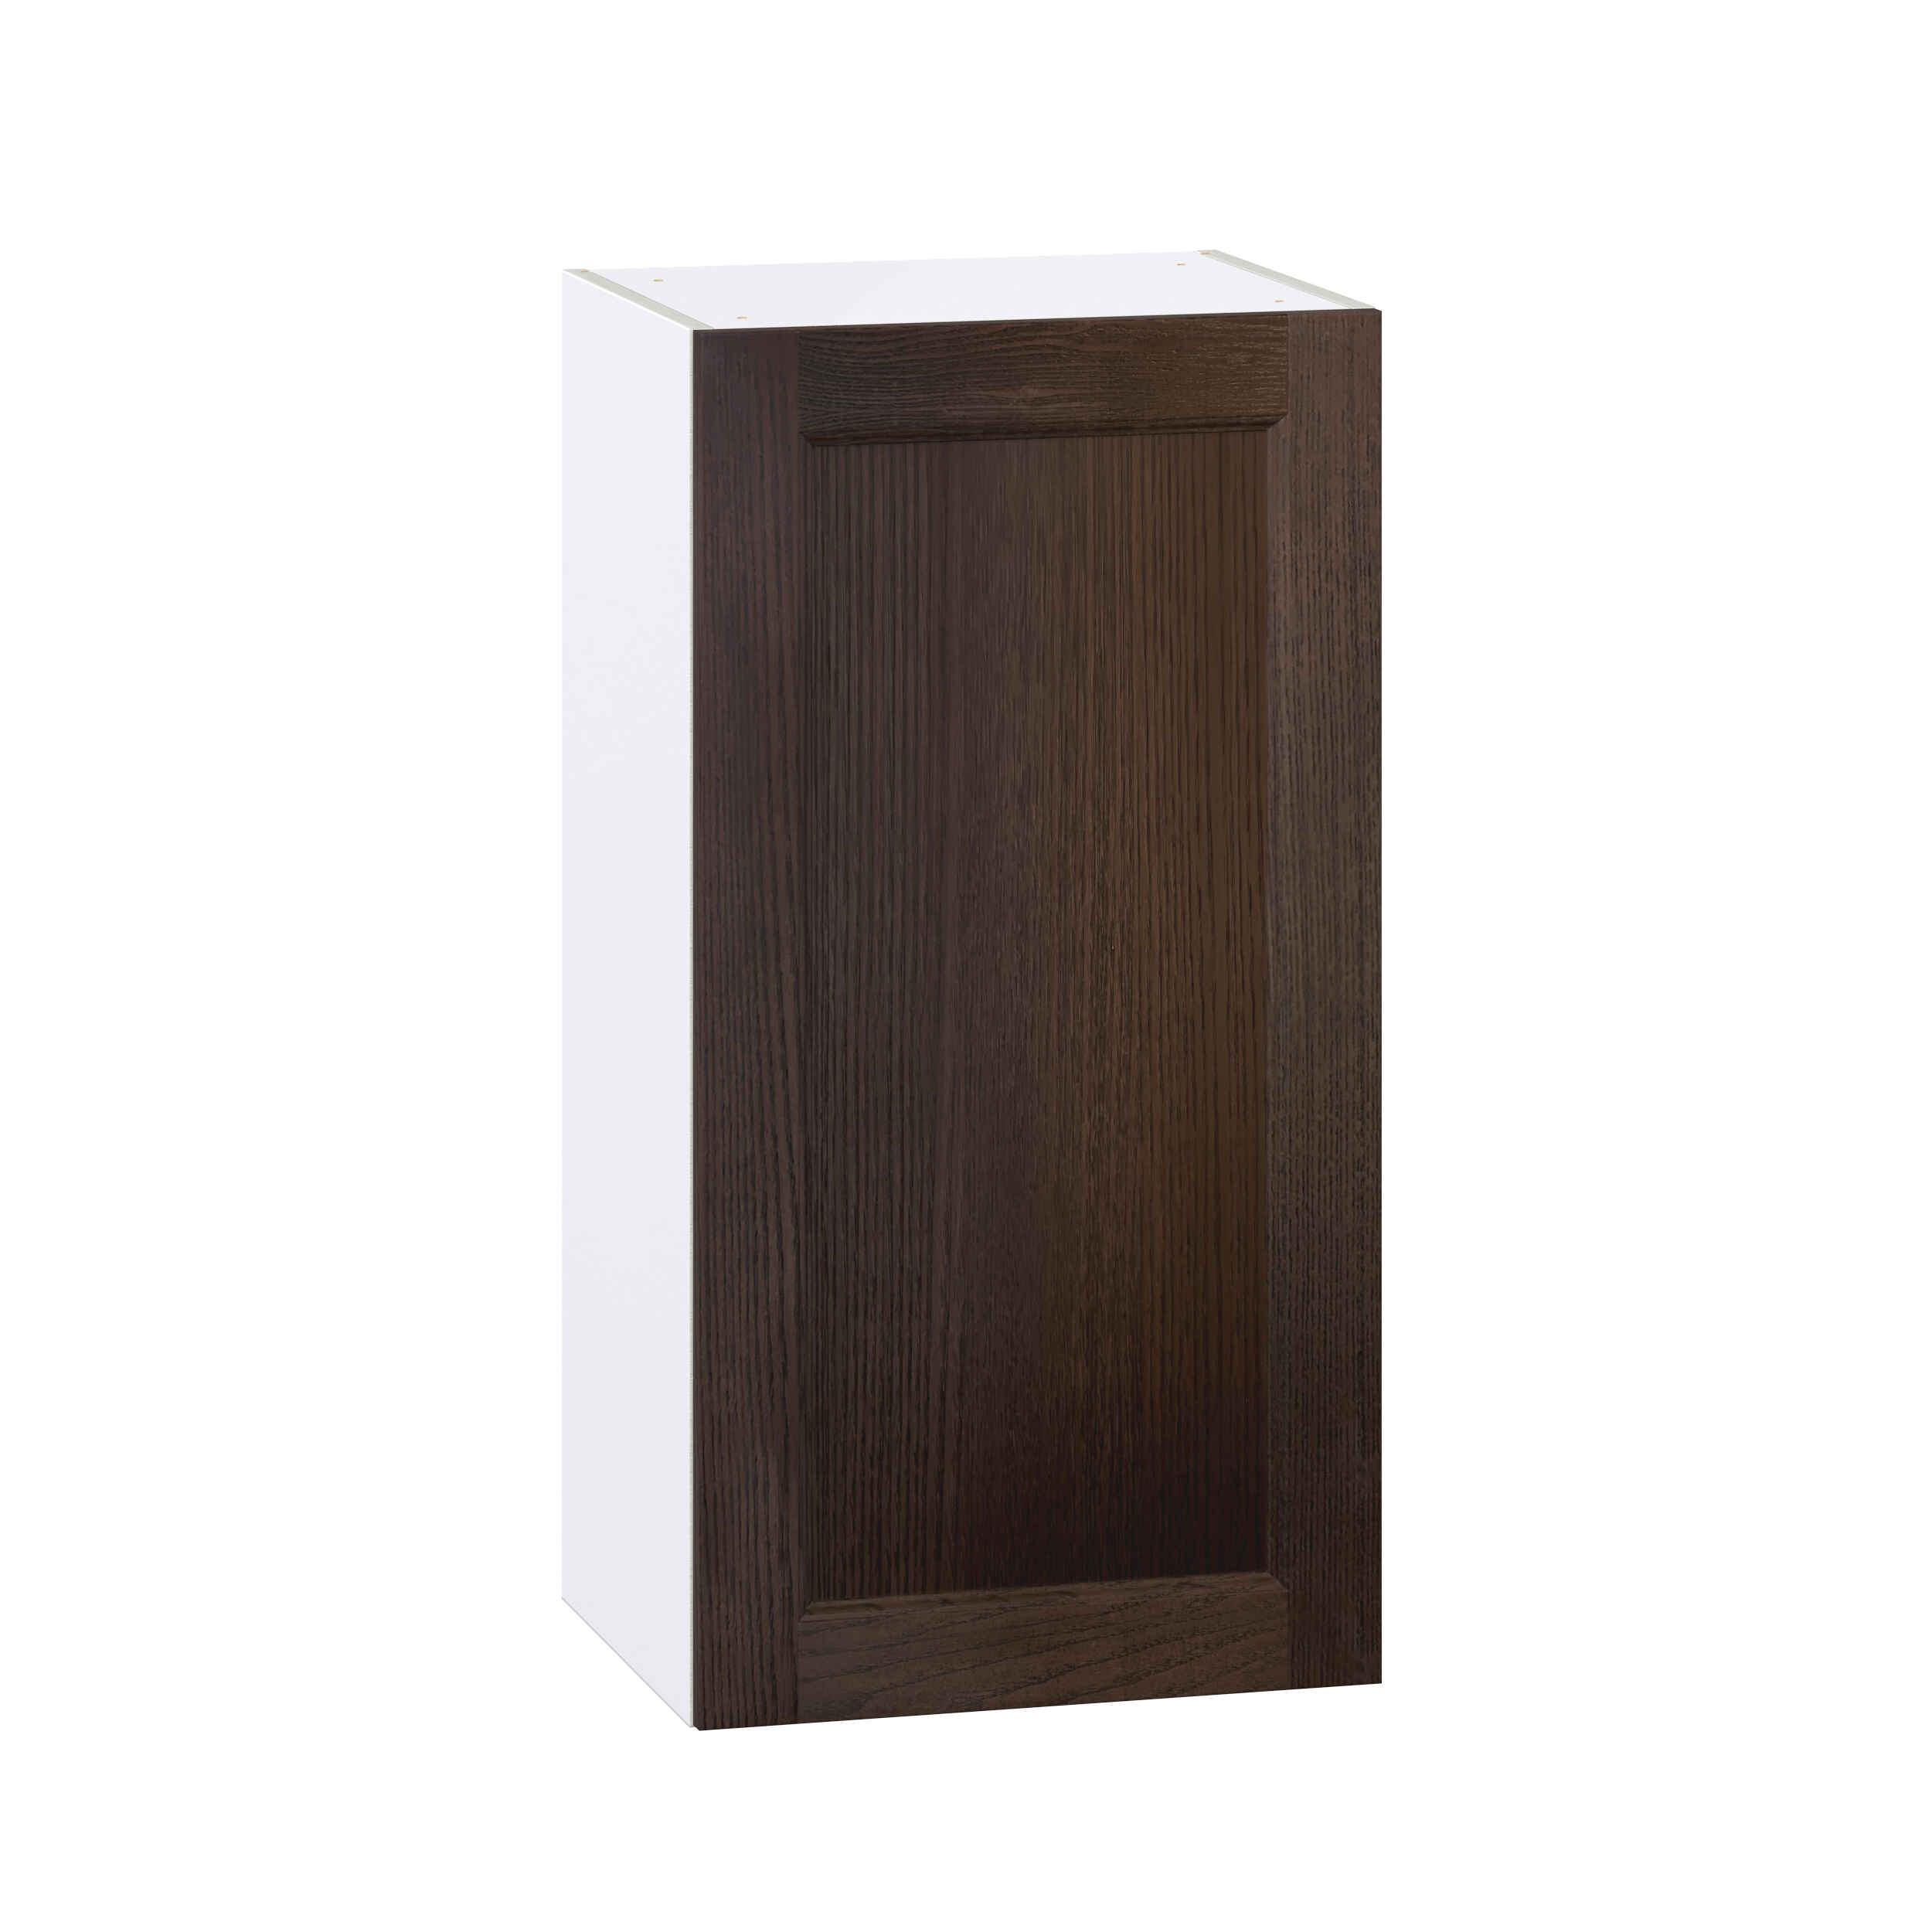 Summerina Chestnut Solid Wood Recessed Assembled Wall  Cabinet with Full High Door (18 in. W x 35 in. H x 14 in. D)